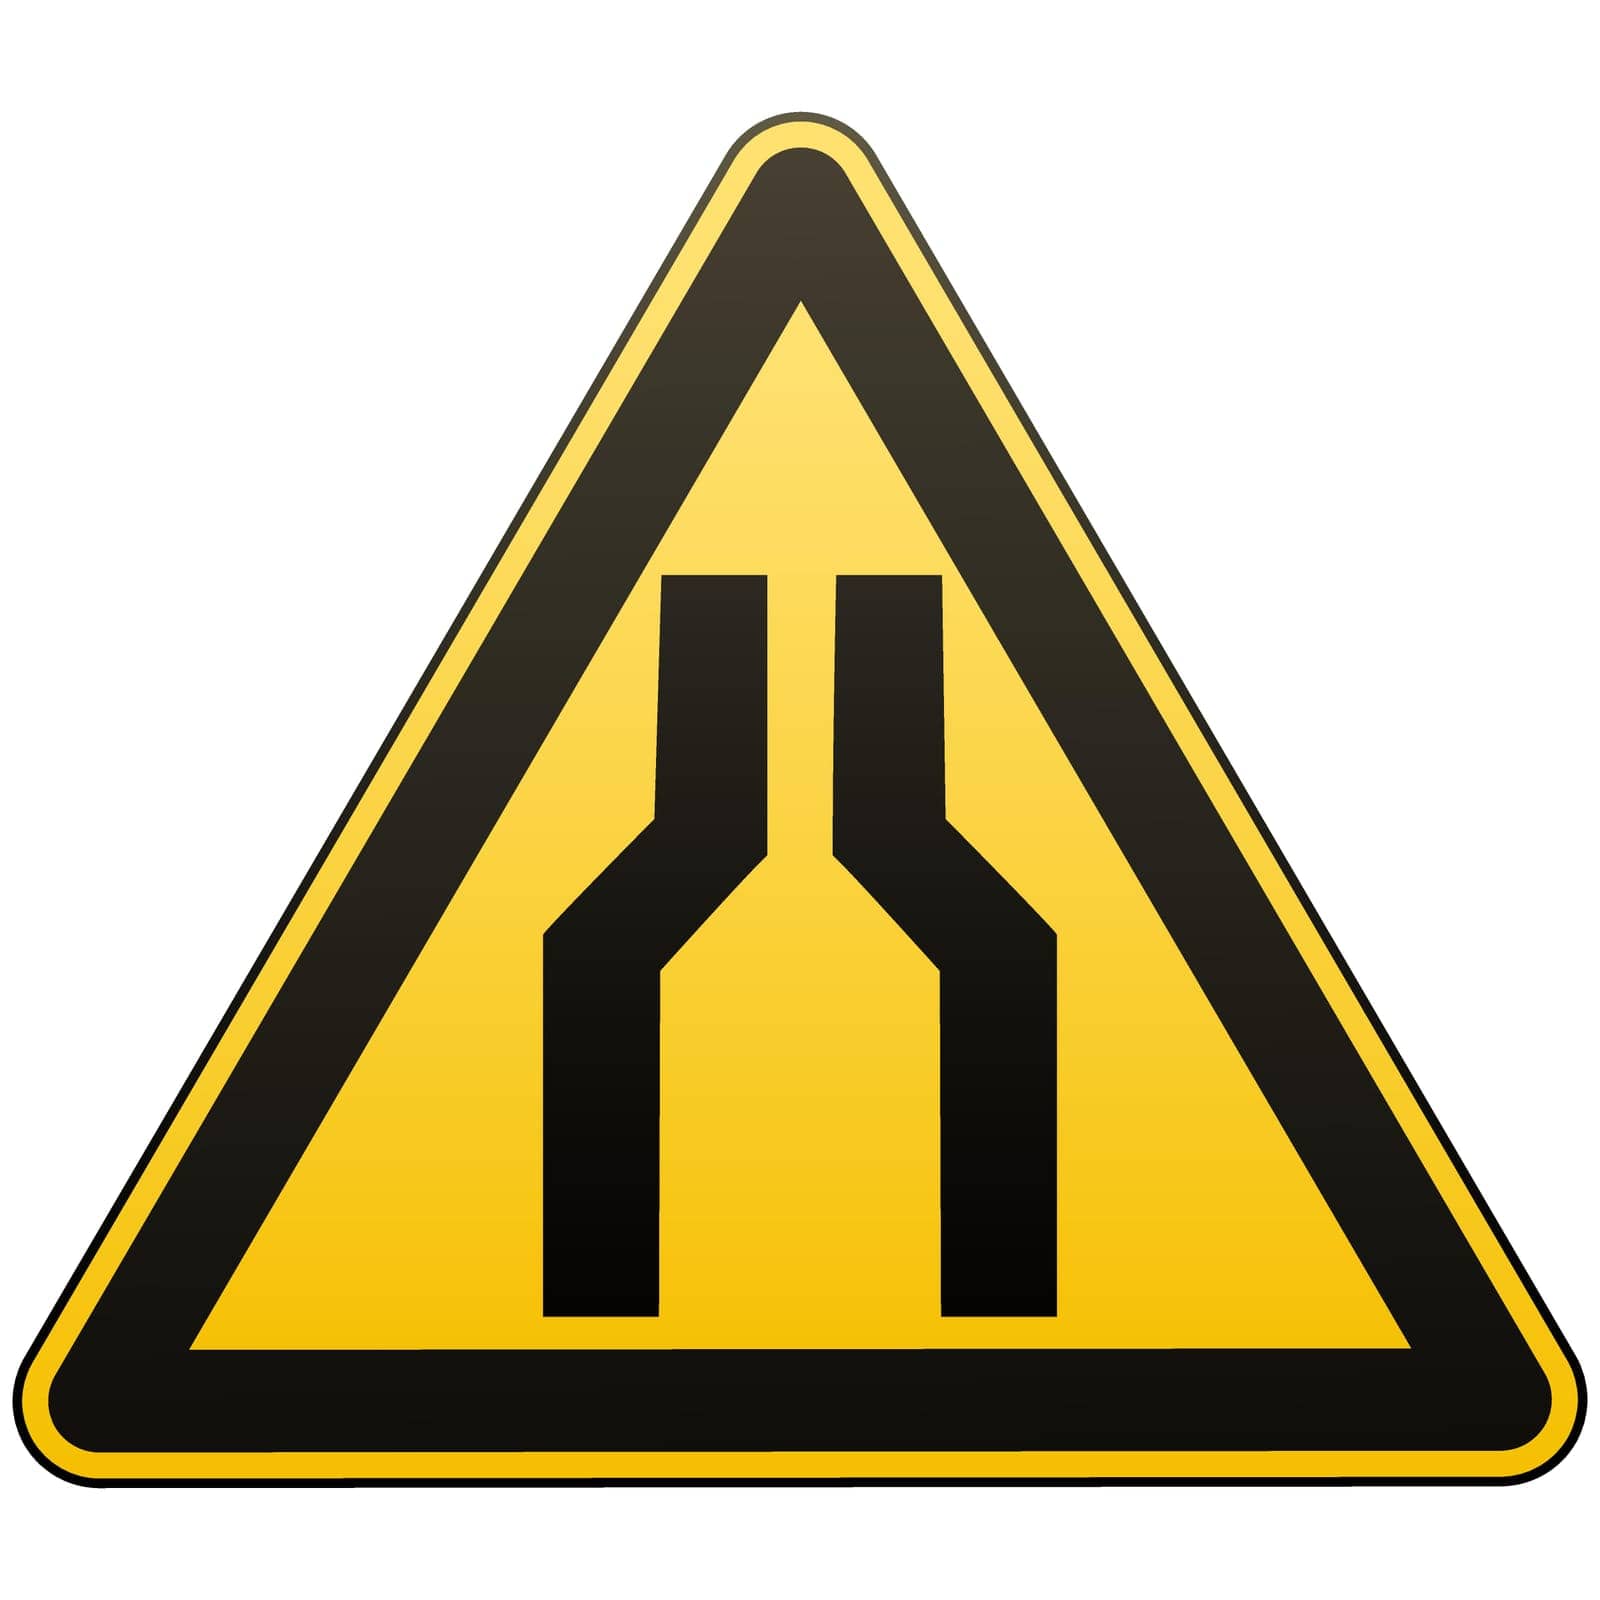 Caution - danger. Carefully narrow the passage. Warning sign. Yellow triangle with a black image. White background. Vector illustration.